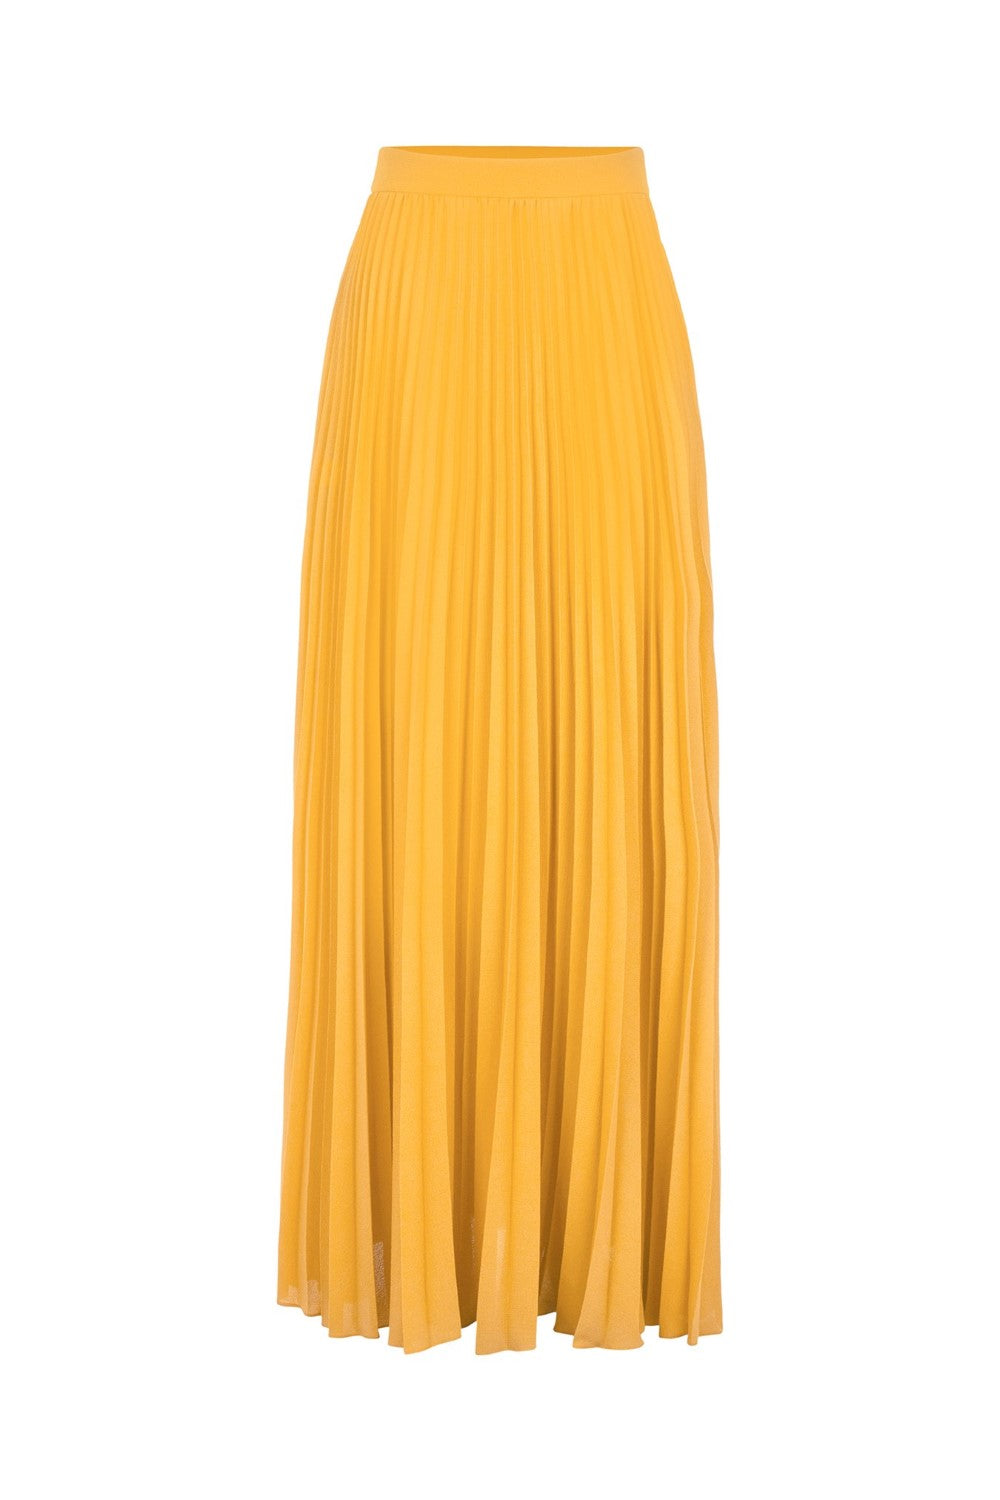 This Le Fleur pleated maxi skirt is perfect for vacations. Slip it on over the swimsuits in solid colors like purple for a sophisticated poolside look